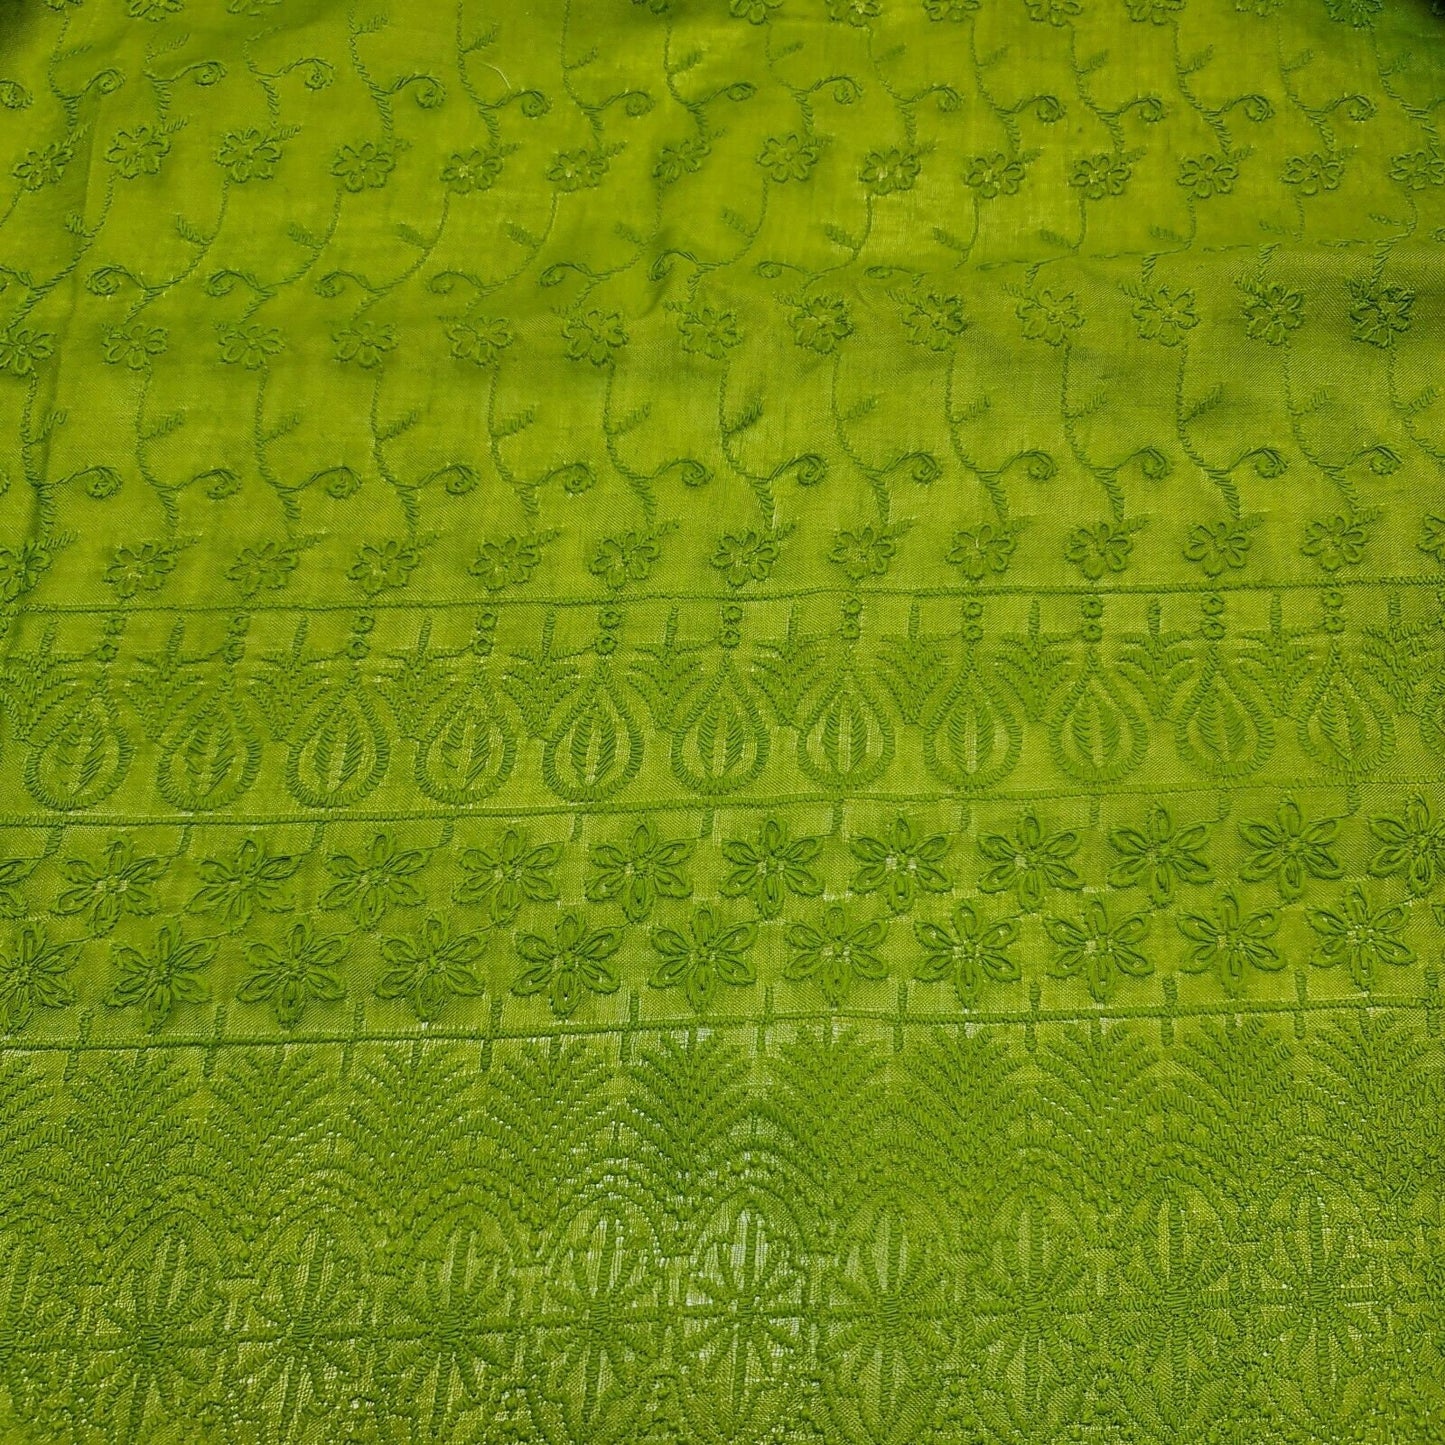 NEW SPRING 100% Cotton Lawn Broderie Anglaise Embroidery Dress Craft Fabric 44" (Olive Green)